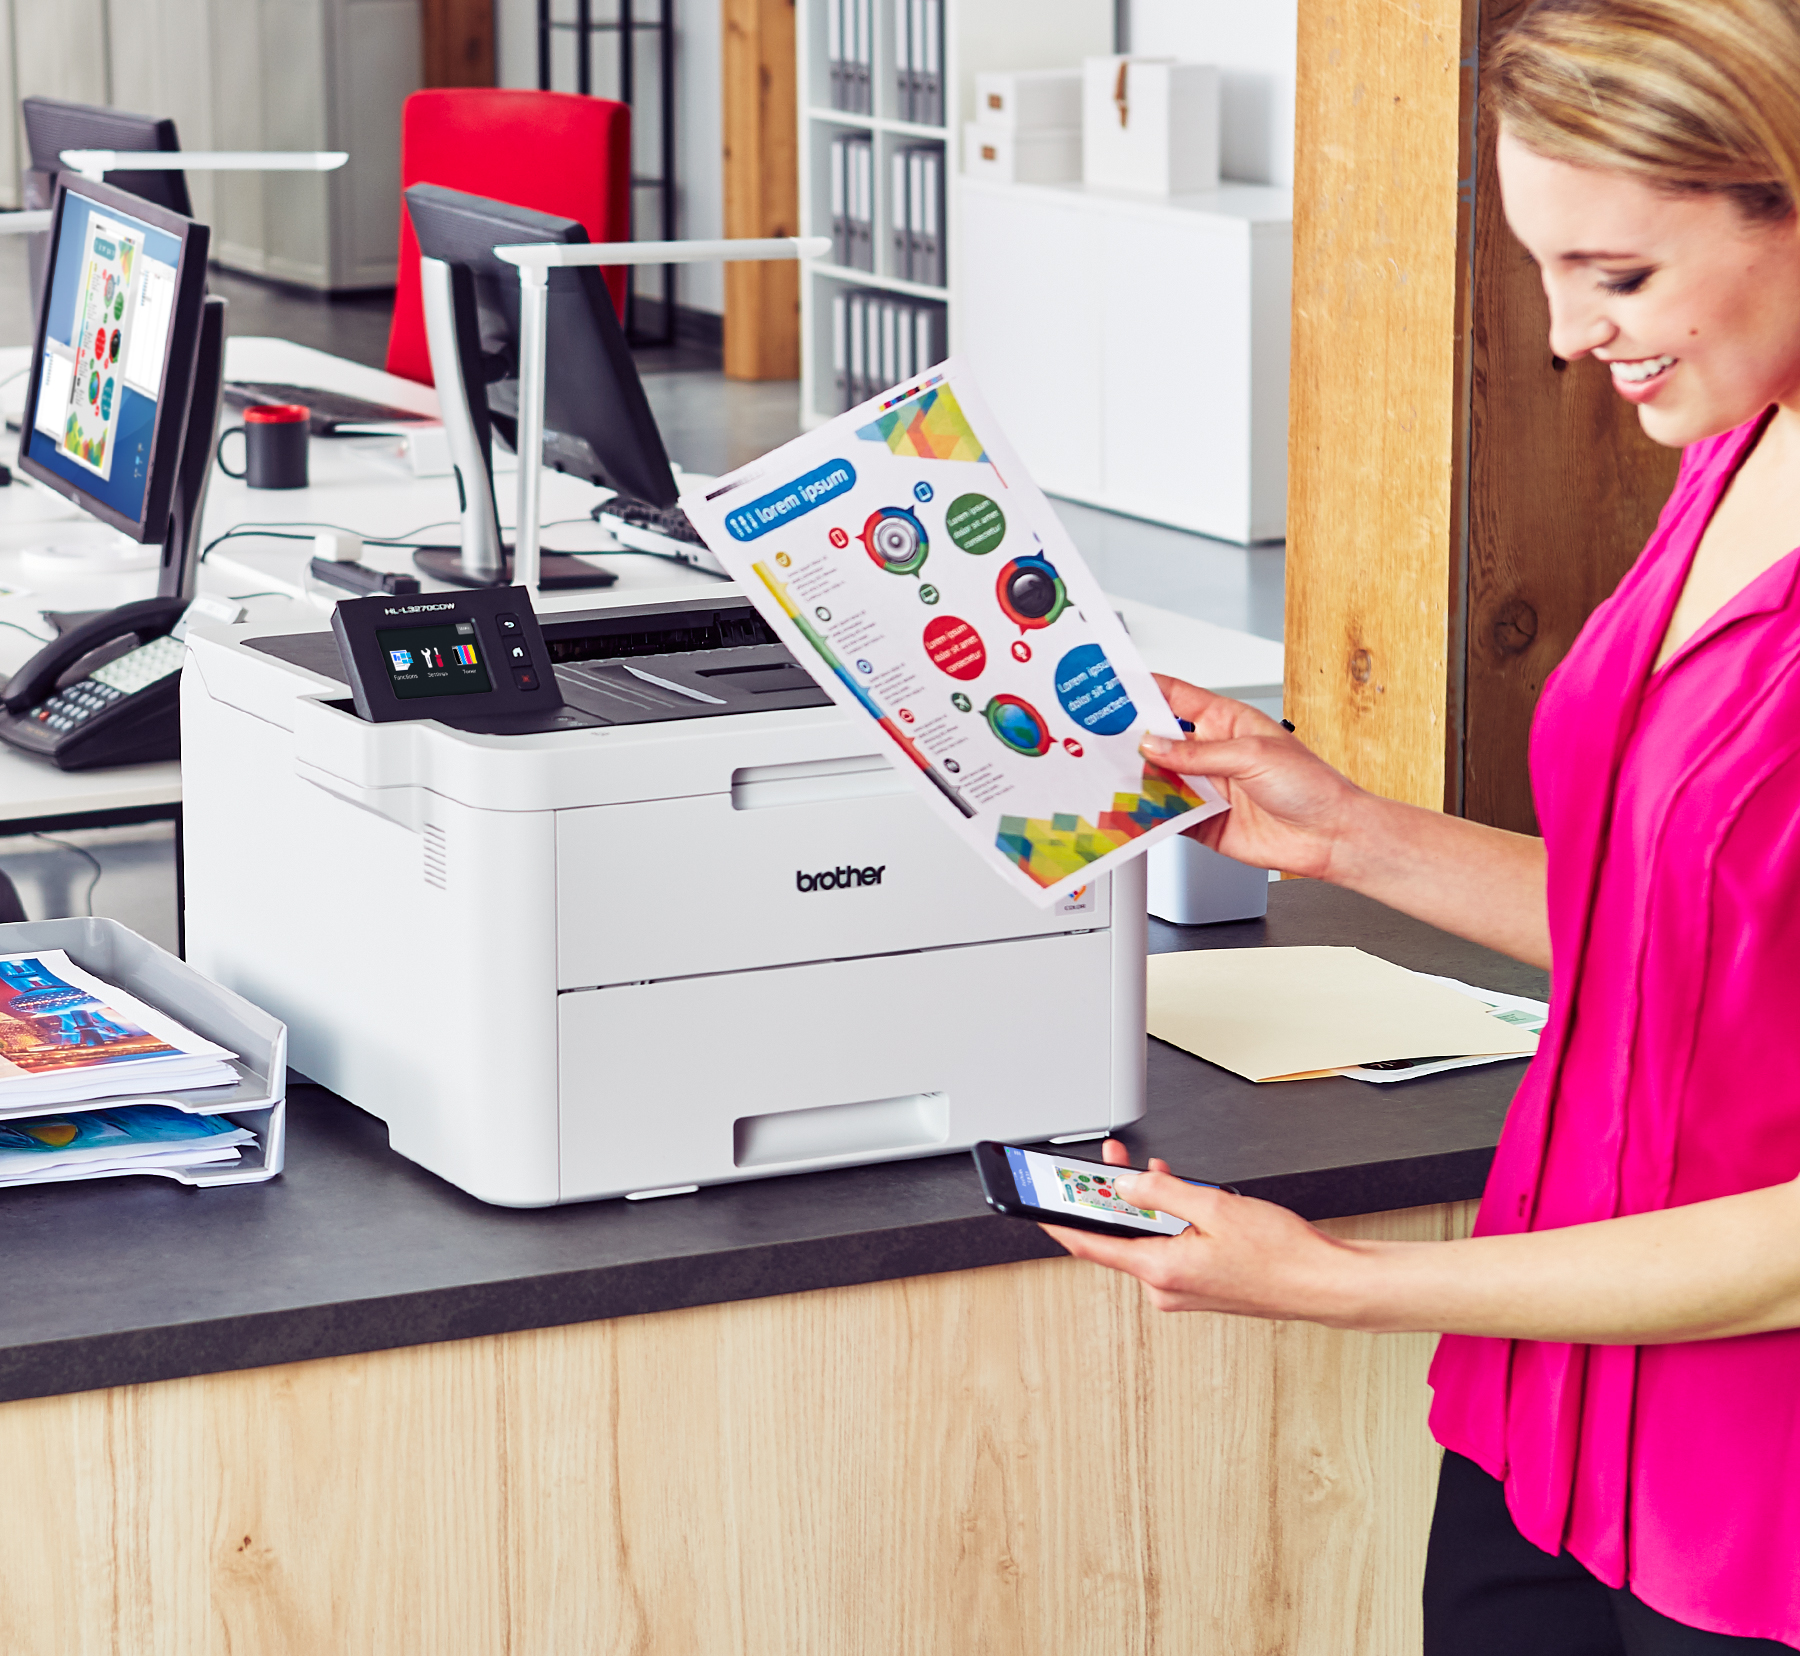 Brother HL-L3270CDW Compact Digital Color Printer Providing Laser Quality Results with NFC, Wireless and Duplex Printing - image 3 of 9